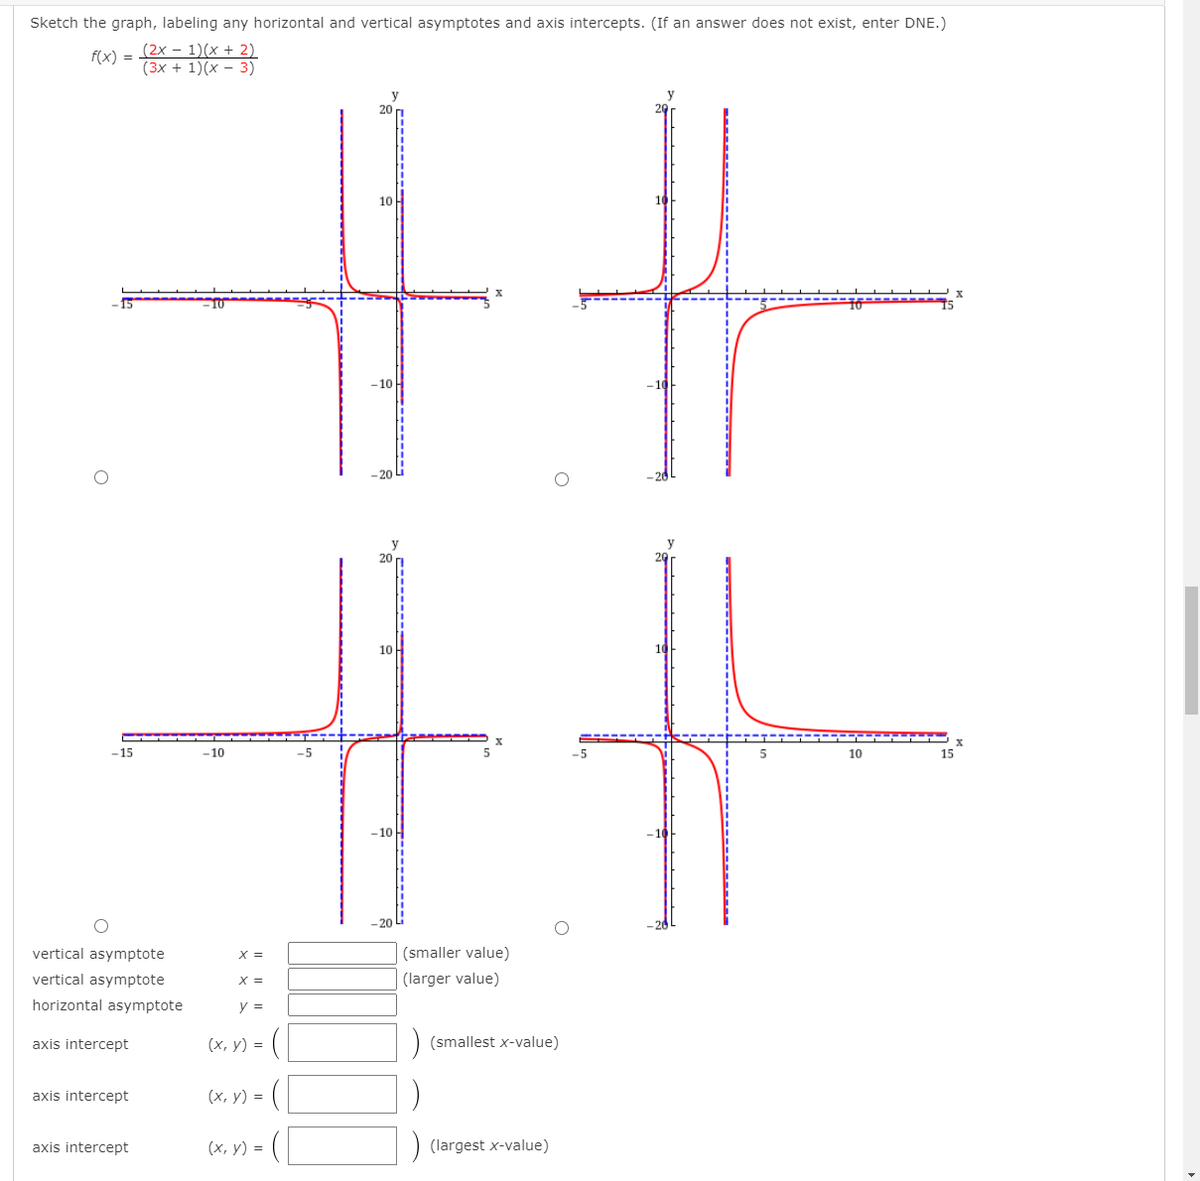 Sketch the graph, labeling any horizontal and vertical asymptotes and axis intercepts. (If an answer does not exist, enter DNE.)
(2x – 1)(x + 2)
(3х + 1)(х — 3)
f(x) =
20
10 H
-10
20
10
-15
-10
-5
-5
5
10
15
-10H
-20
vertical asymptote
X =
(smaller value)
vertical asymptote
X =
(larger value)
horizontal asymptote
y =
axis intercept
(х, у) %3D
(smallest x-value)
axis intercept
(х, у) %3D
axis intercept
(х, у) %3D
(largest x-value)
